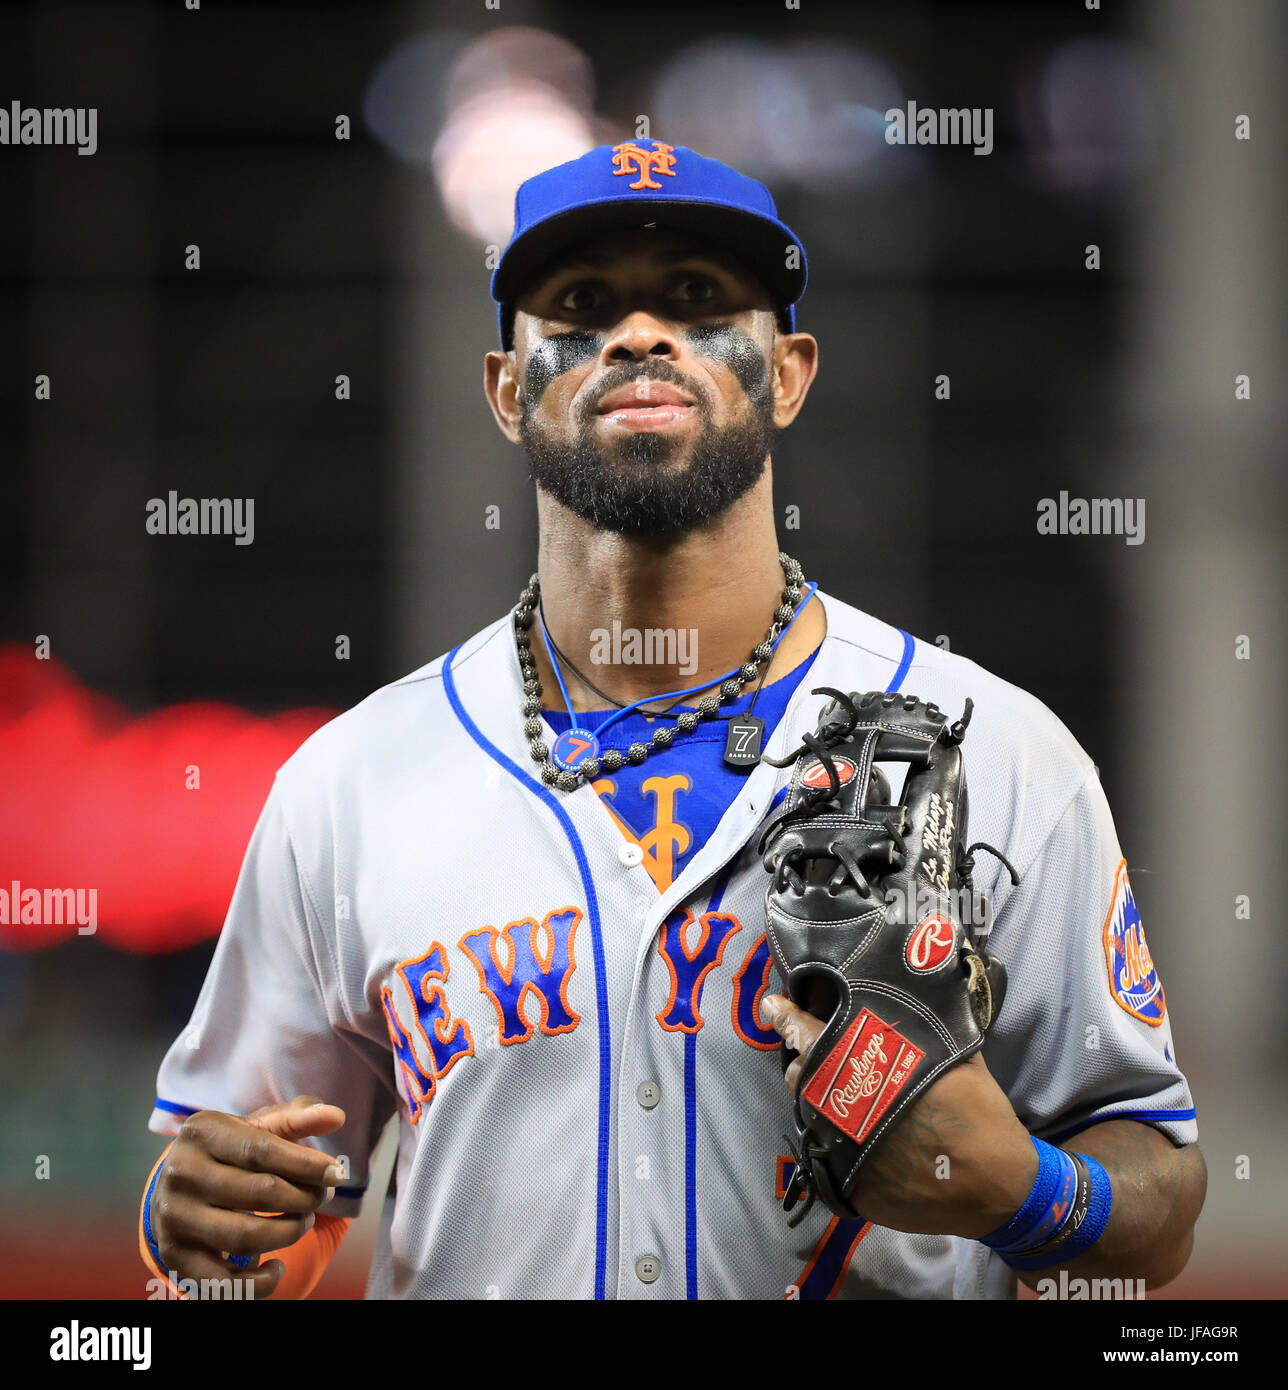 June 29, 2017: New York Mets shortstop Jose Reyes (7) returns to the dugout in the seventh inning during a MLB game between the New York Mets and the Miami Marlins at the Marlins Park, in Miami, Florida. The Mets won 6-3. Mario Houben/CSM Stock Photo